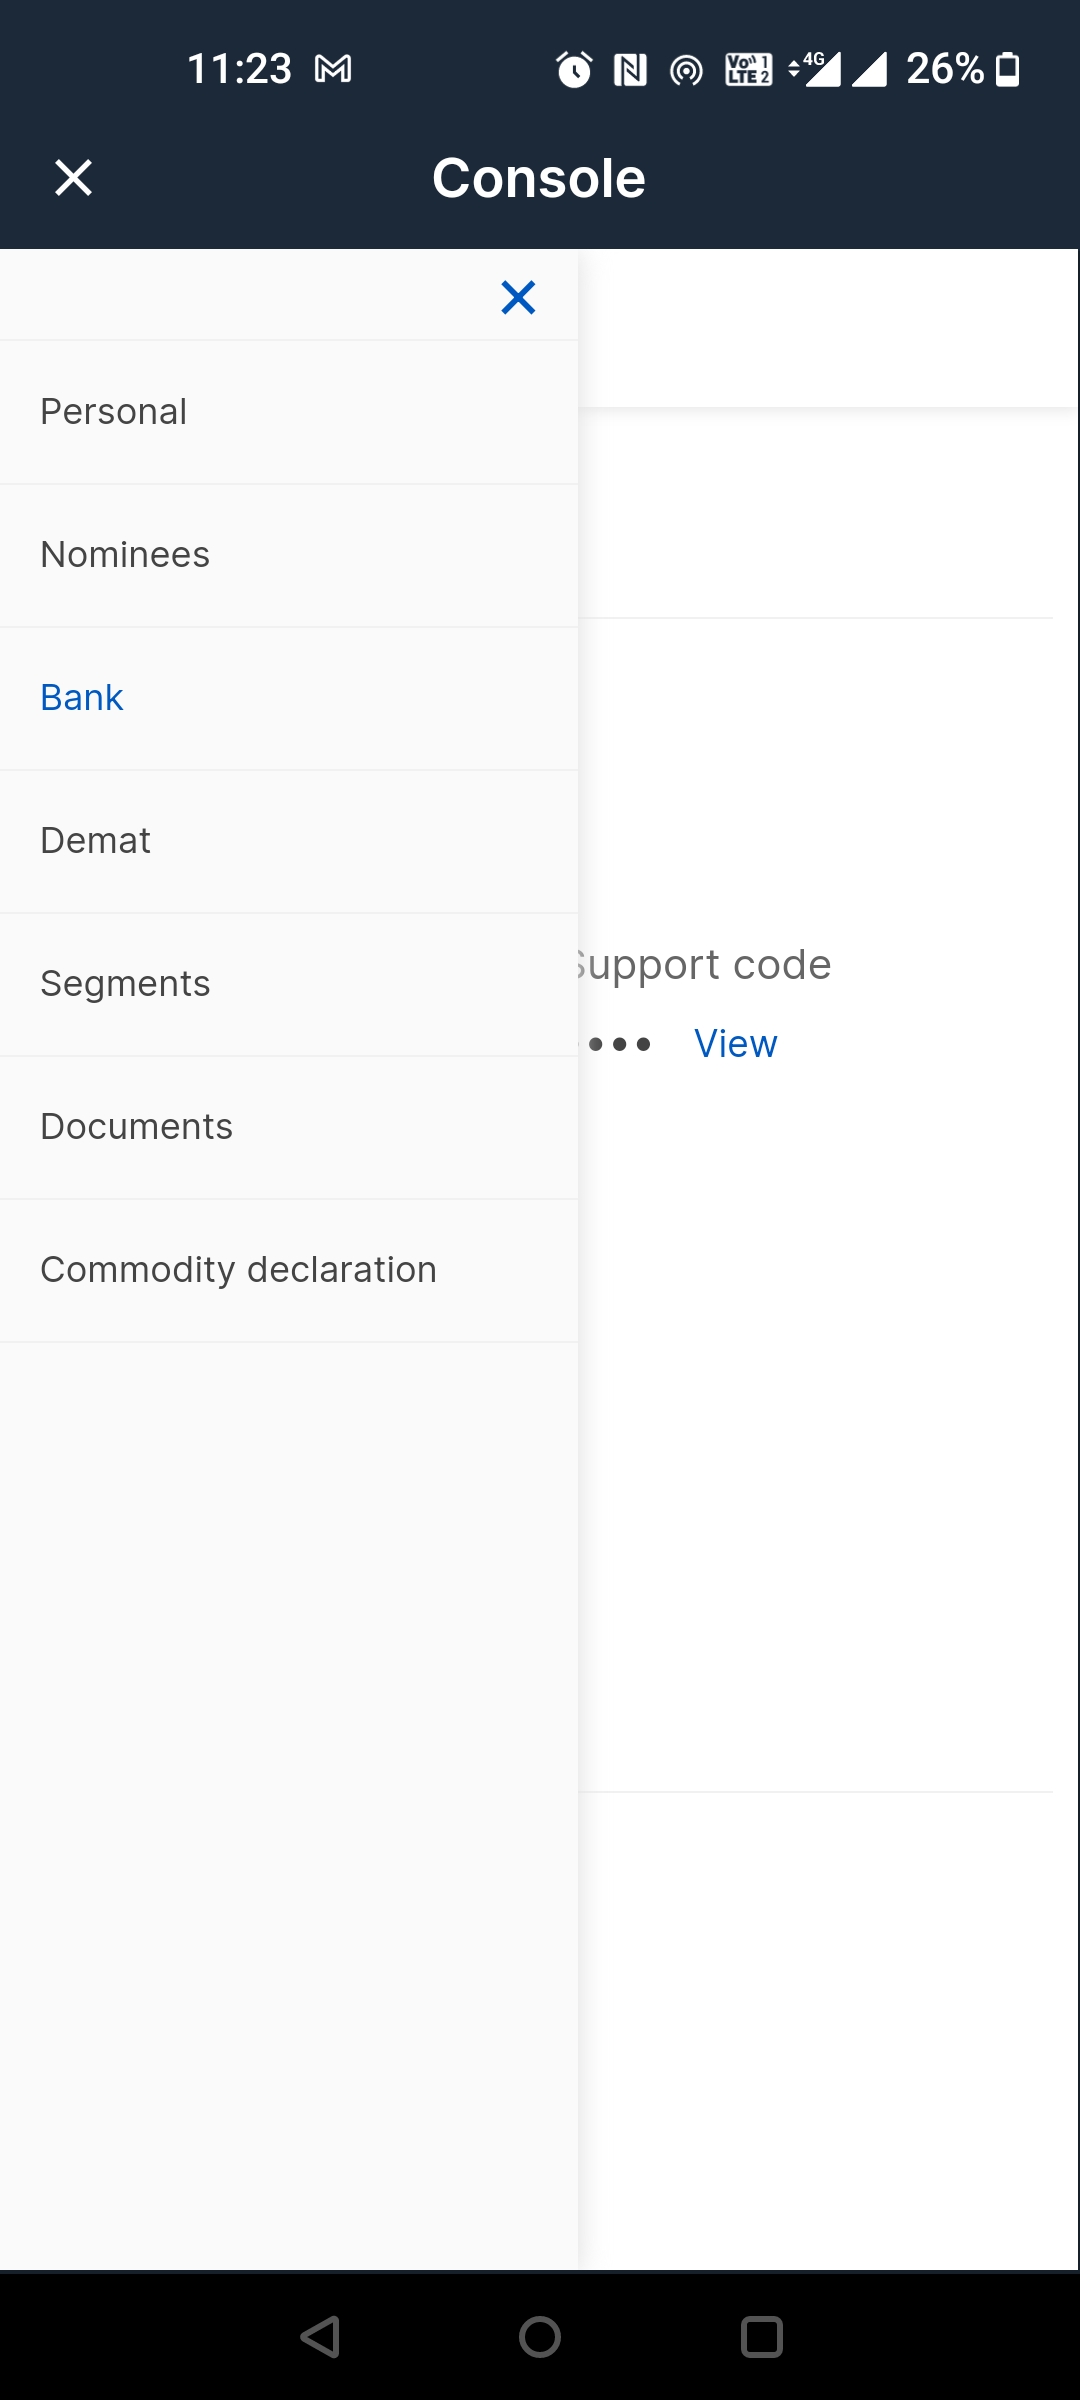 How To Change Bank Account In Zerodha